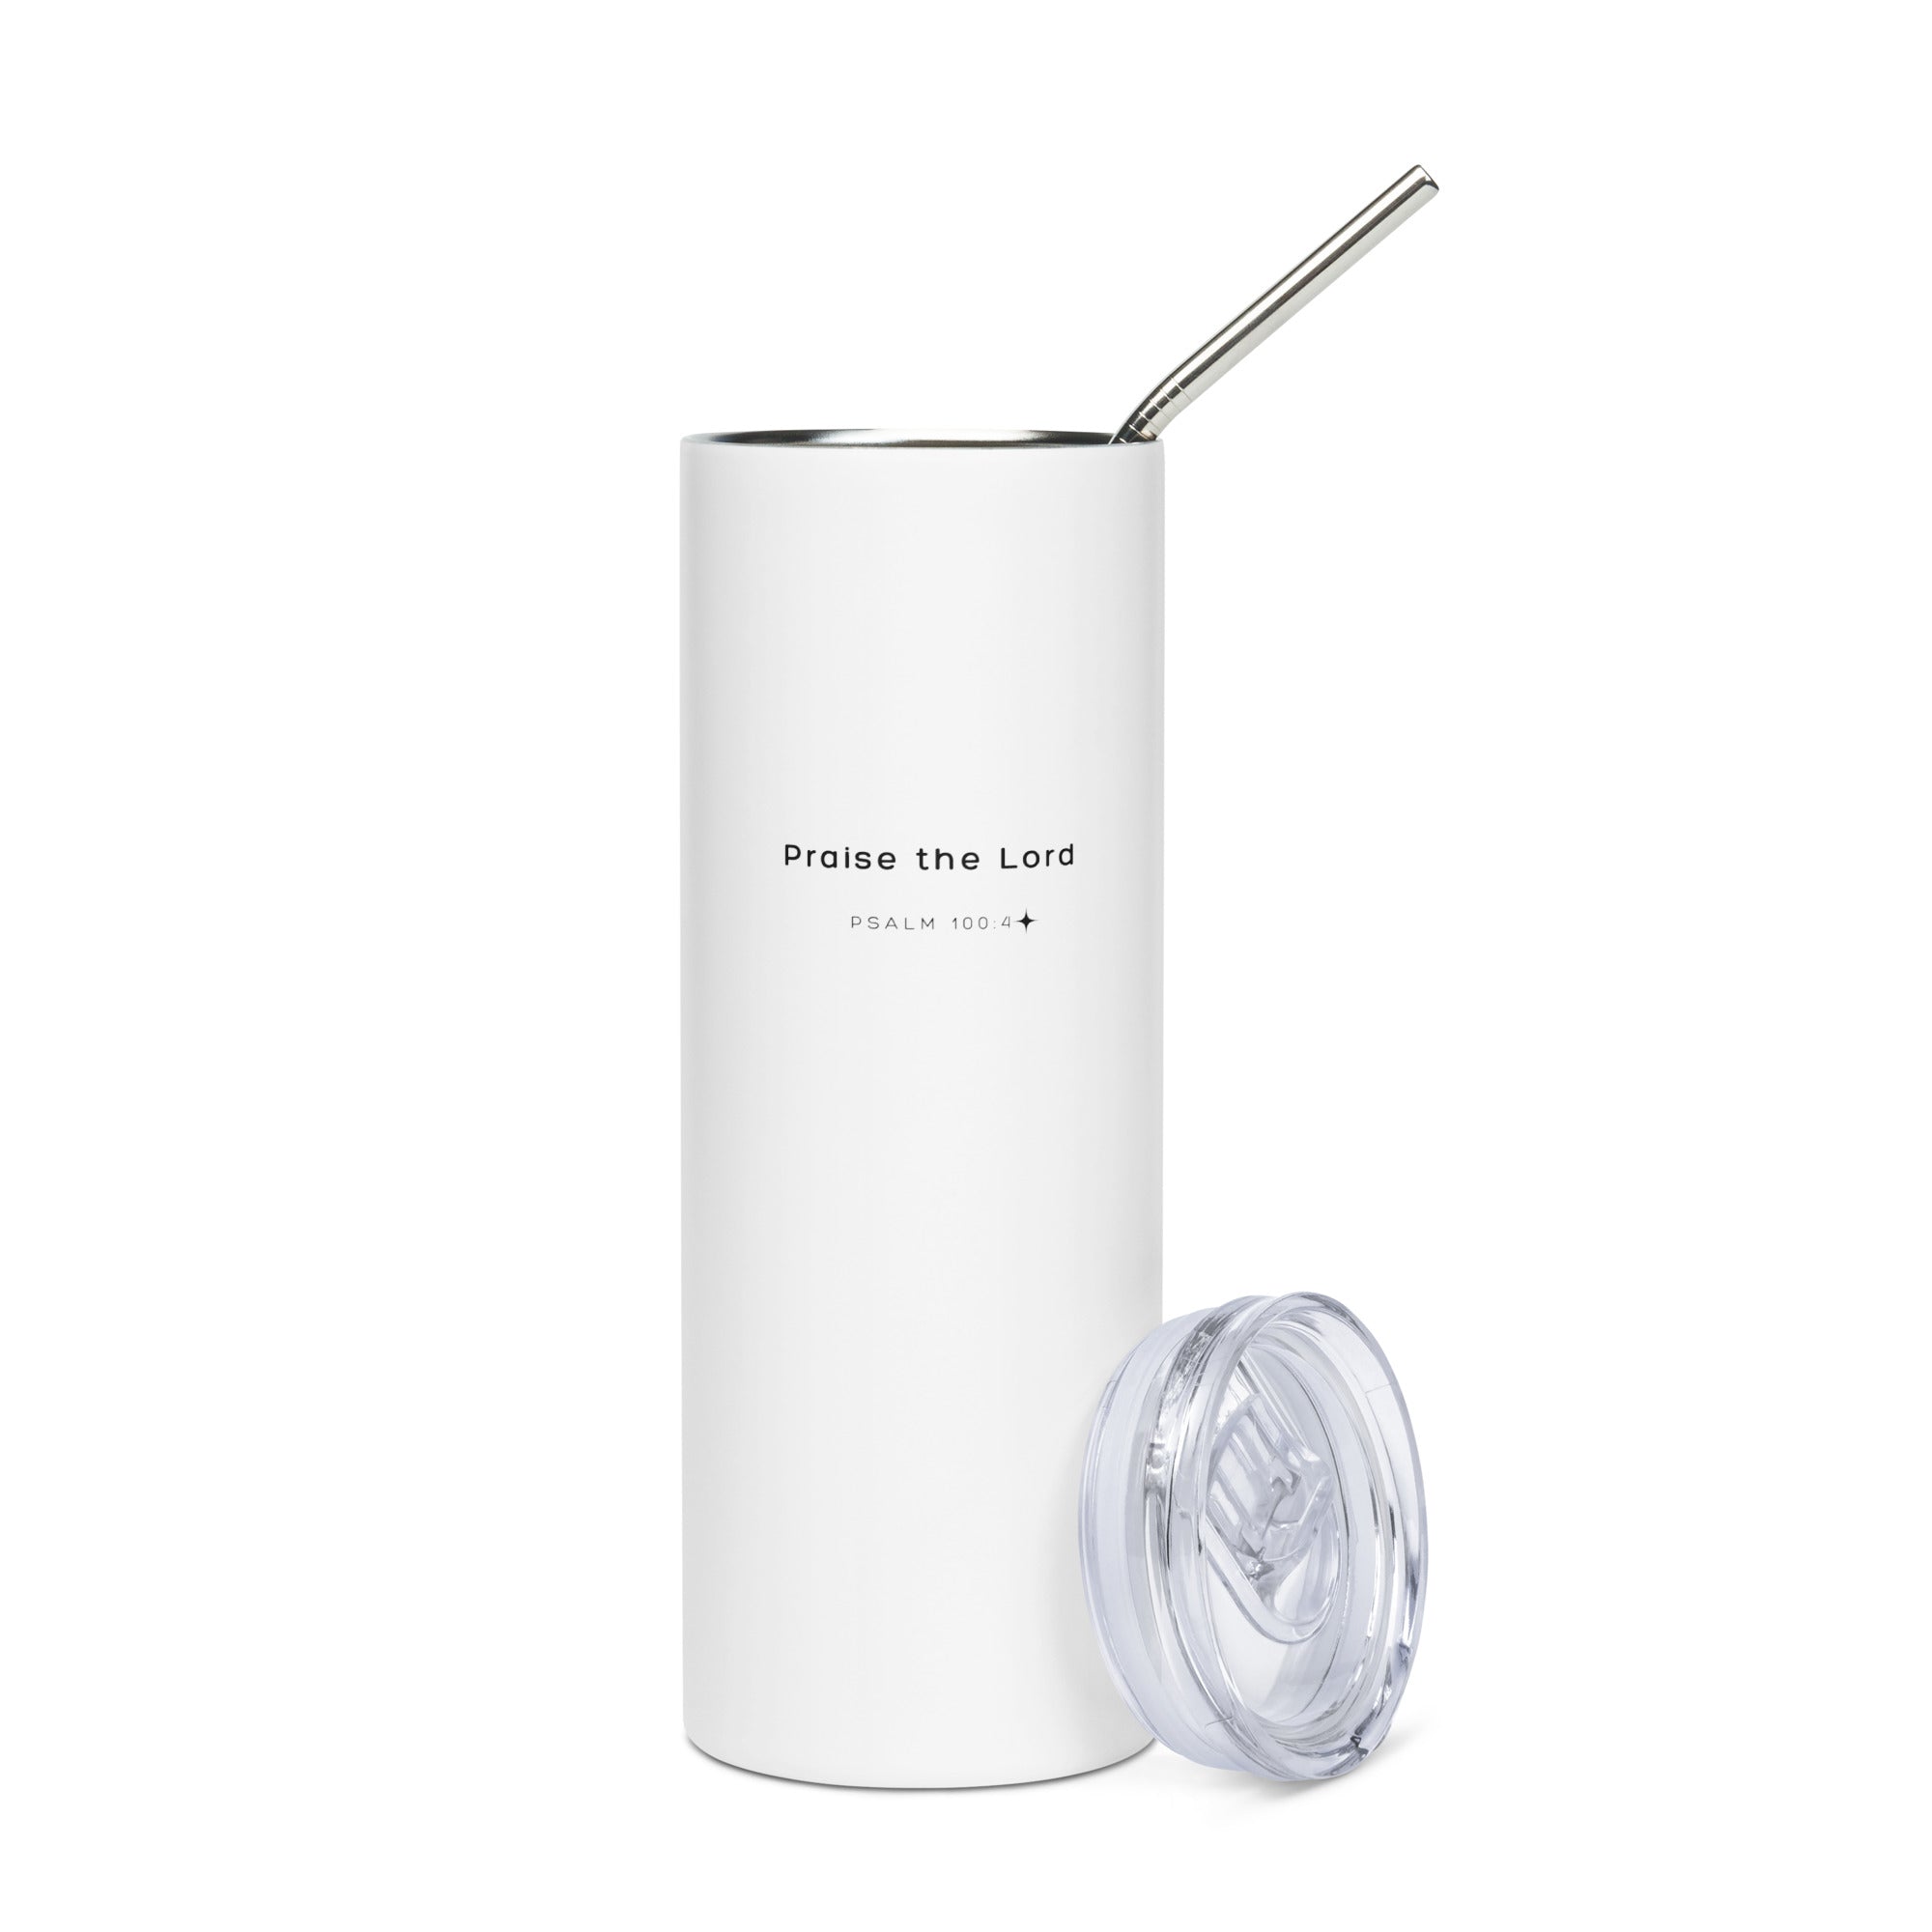 Stainless steel tumbler - Psalm 100:4